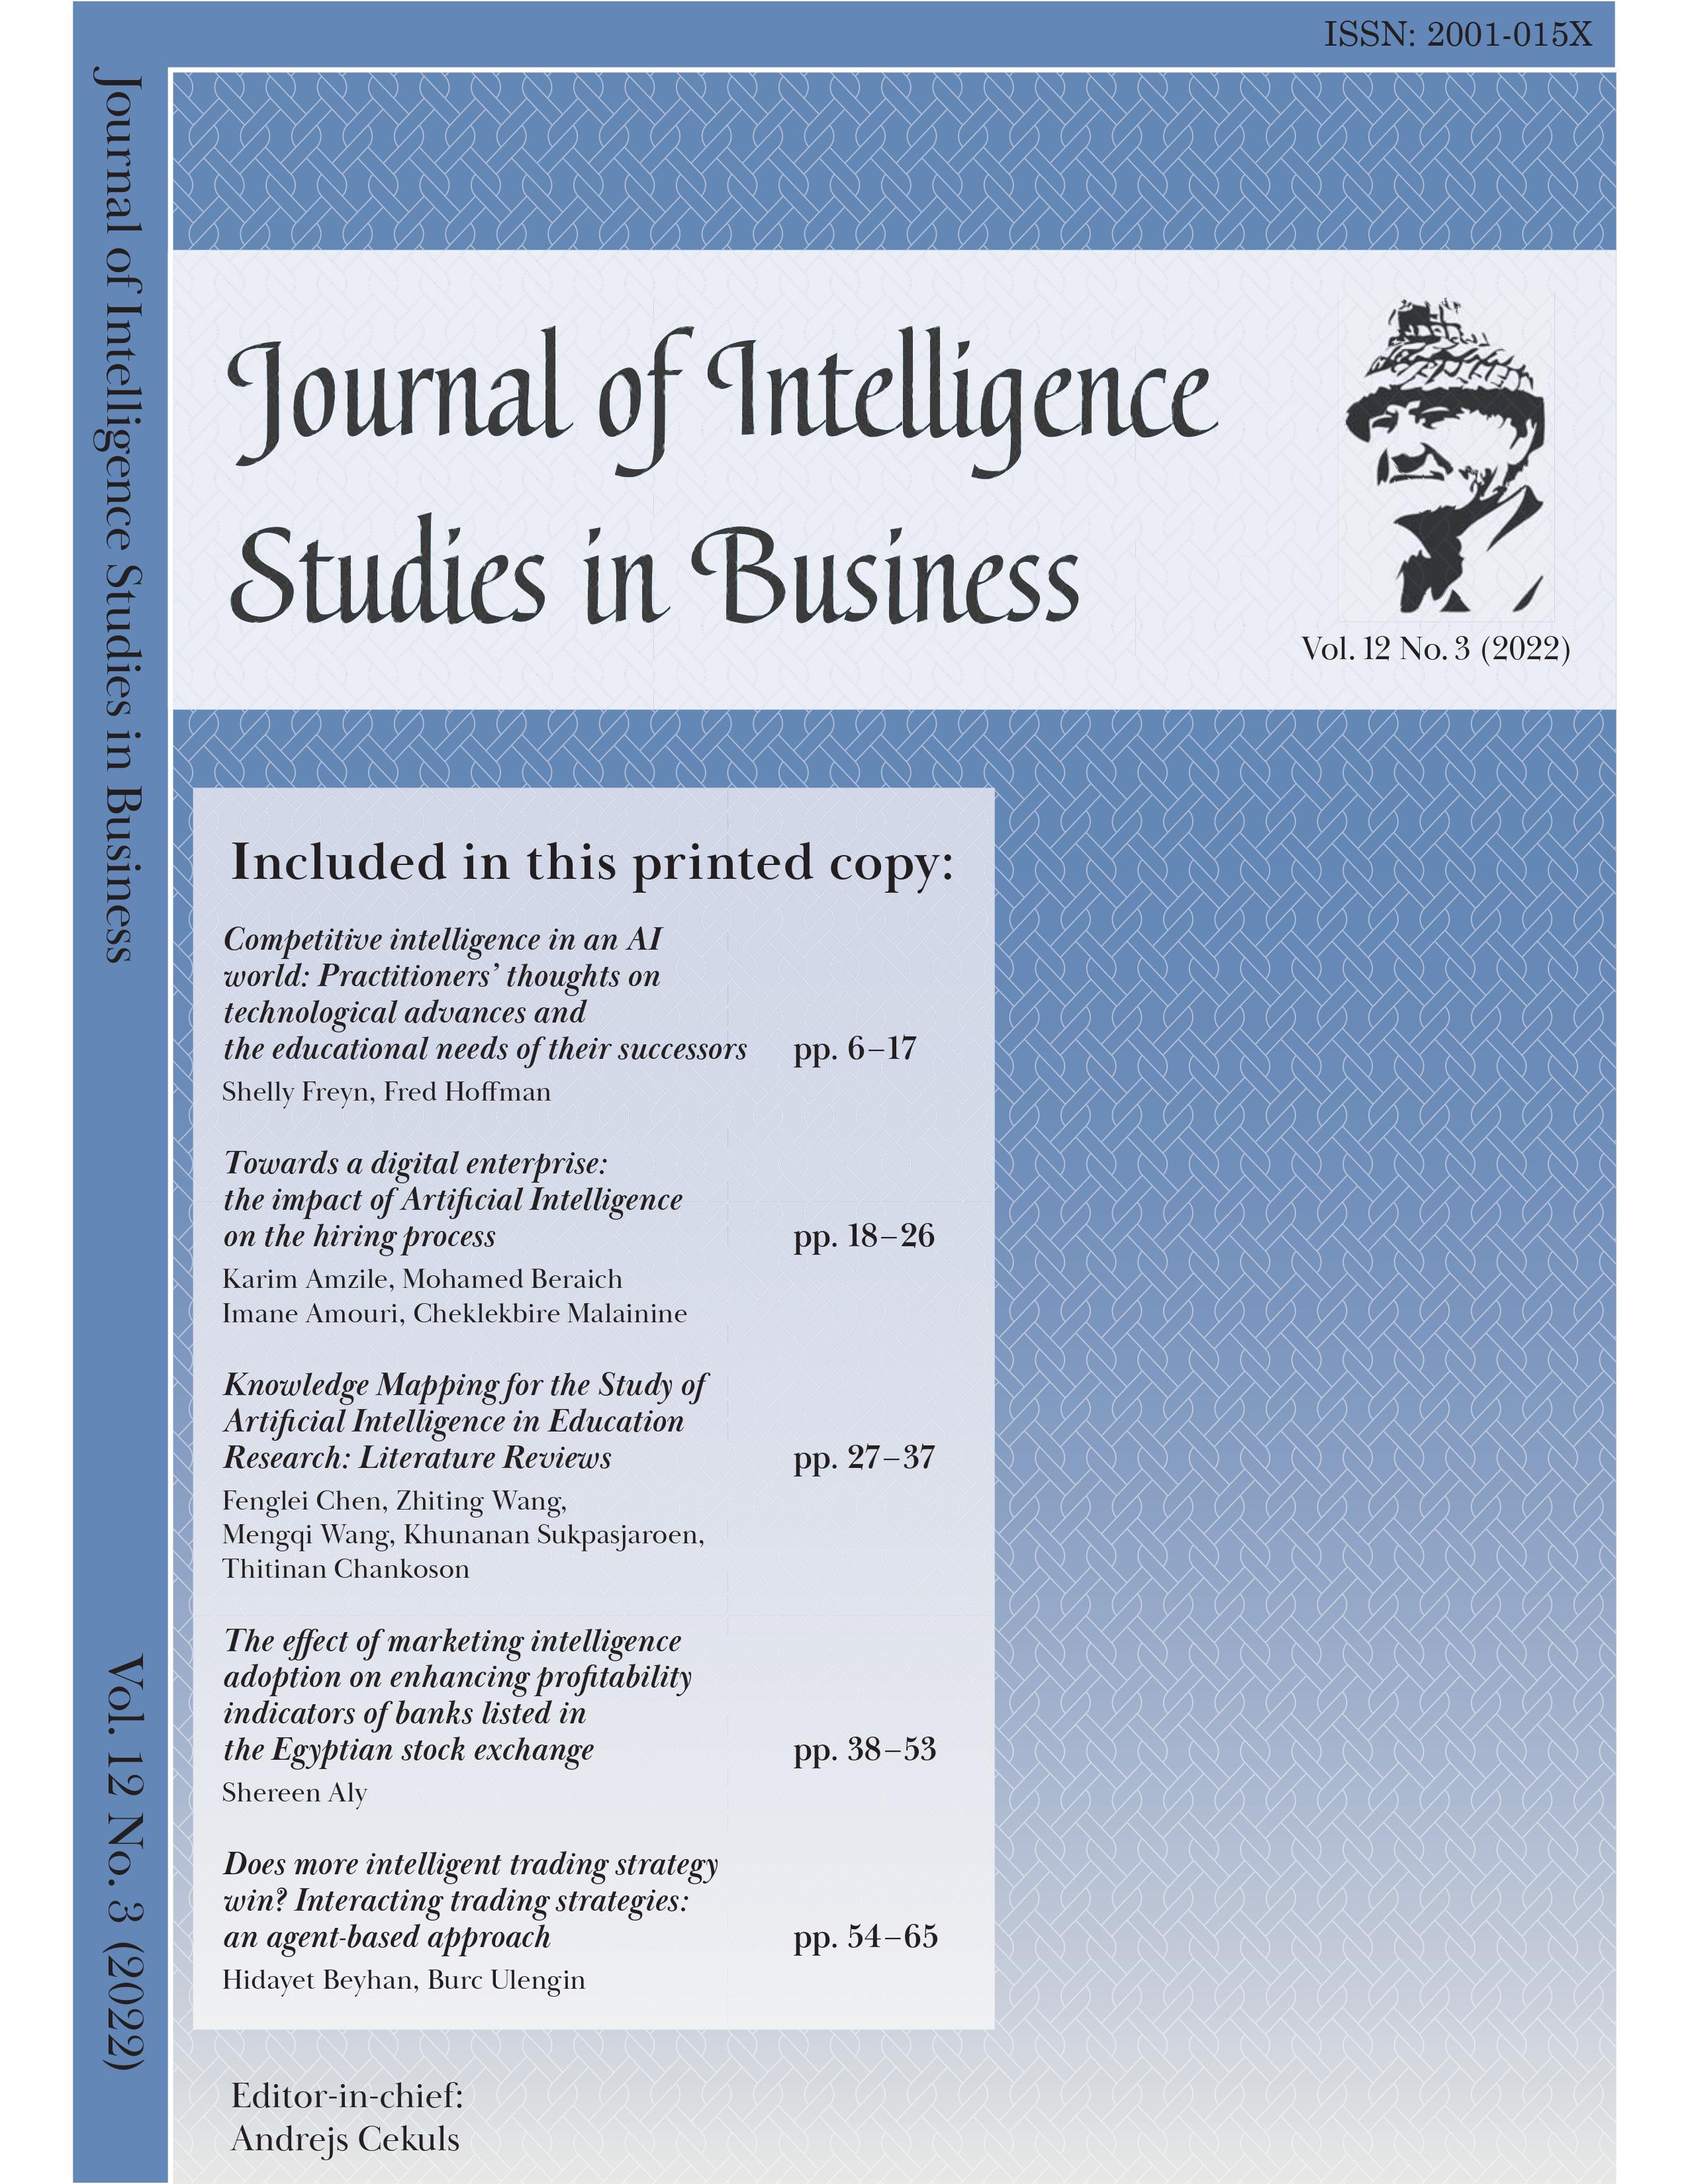 					View Vol. 12 No. 3 (2022): Journal of Intelligence Studies in Business
				